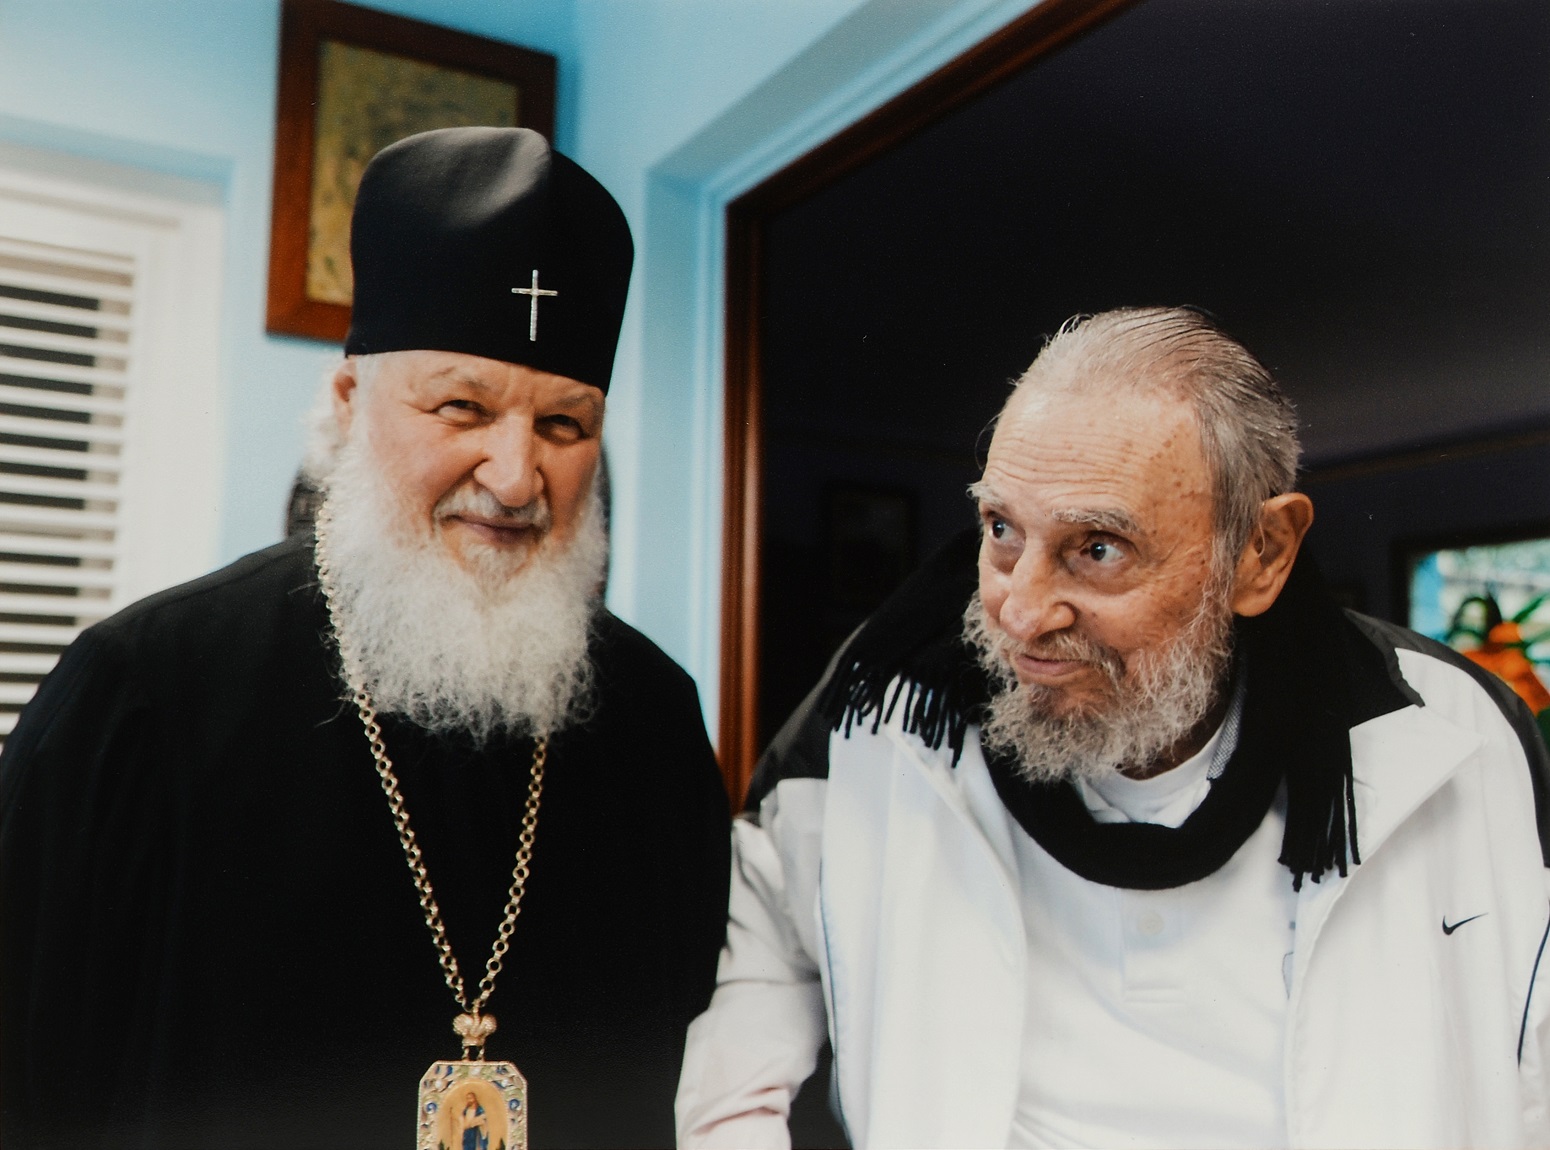 2791586 02/15/2016 Patriarch of Moscow and All Russia Kirill meeting inHhavana with Fidel Castro Rus, the leader of the Cuban revolution, the former chairman of the Cuban State Council and Government./press service of a patriarchy of ROC